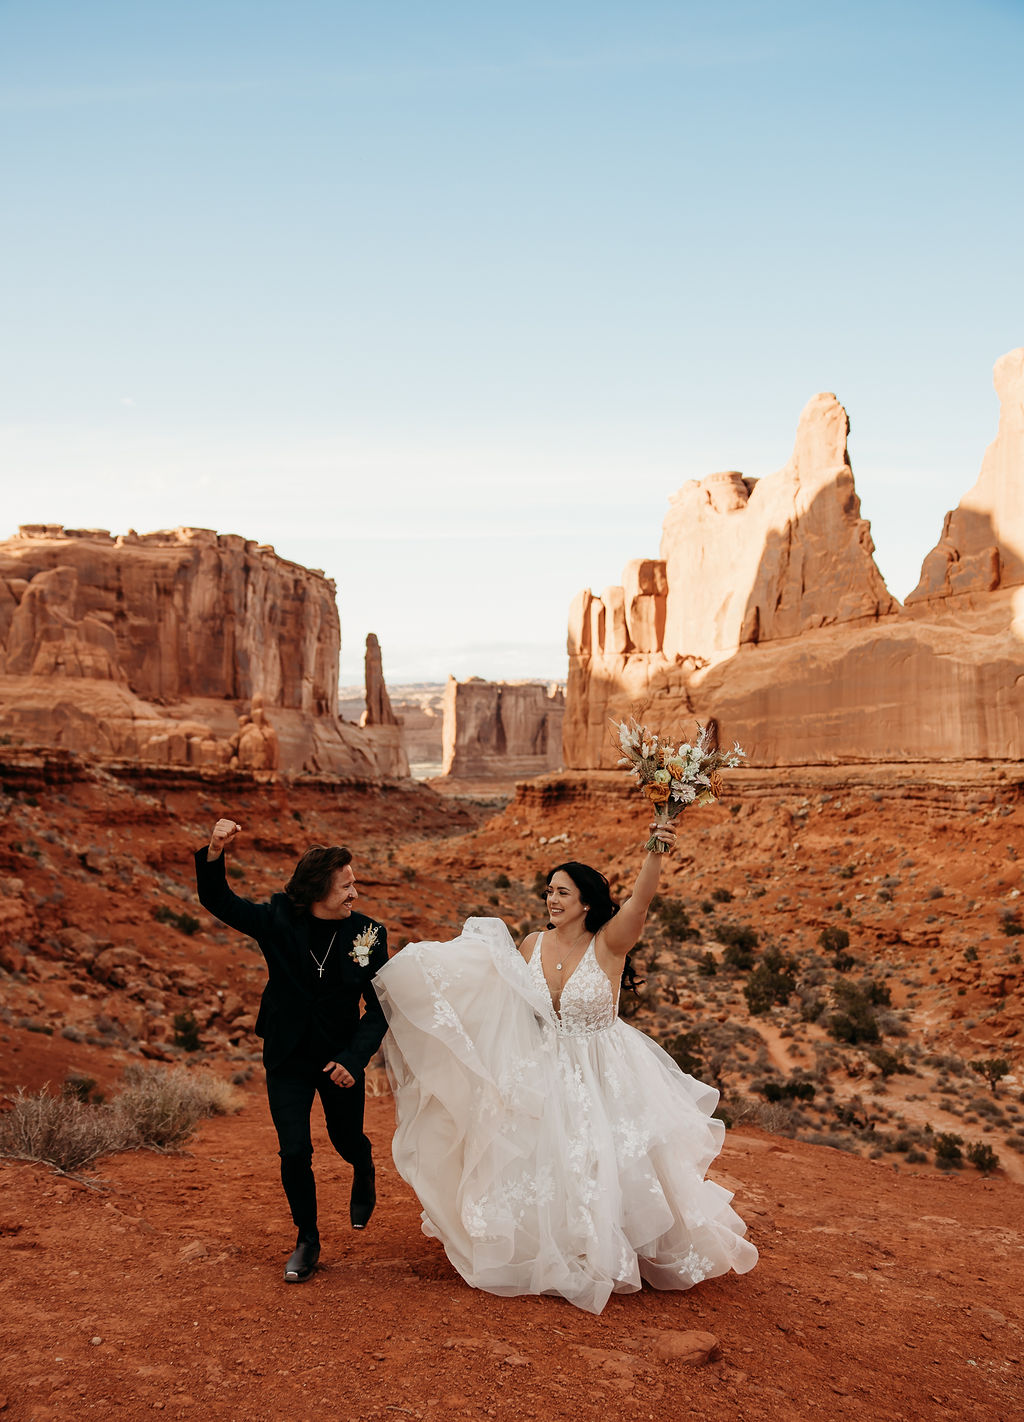 A couple in wedding attire embracing in front of the balanced rock formation. | PHOTOGRAPHY BY BROGAN |  5 REASONS TO HAVE A MOAB NATIONAL PARK ELOPEMENT 